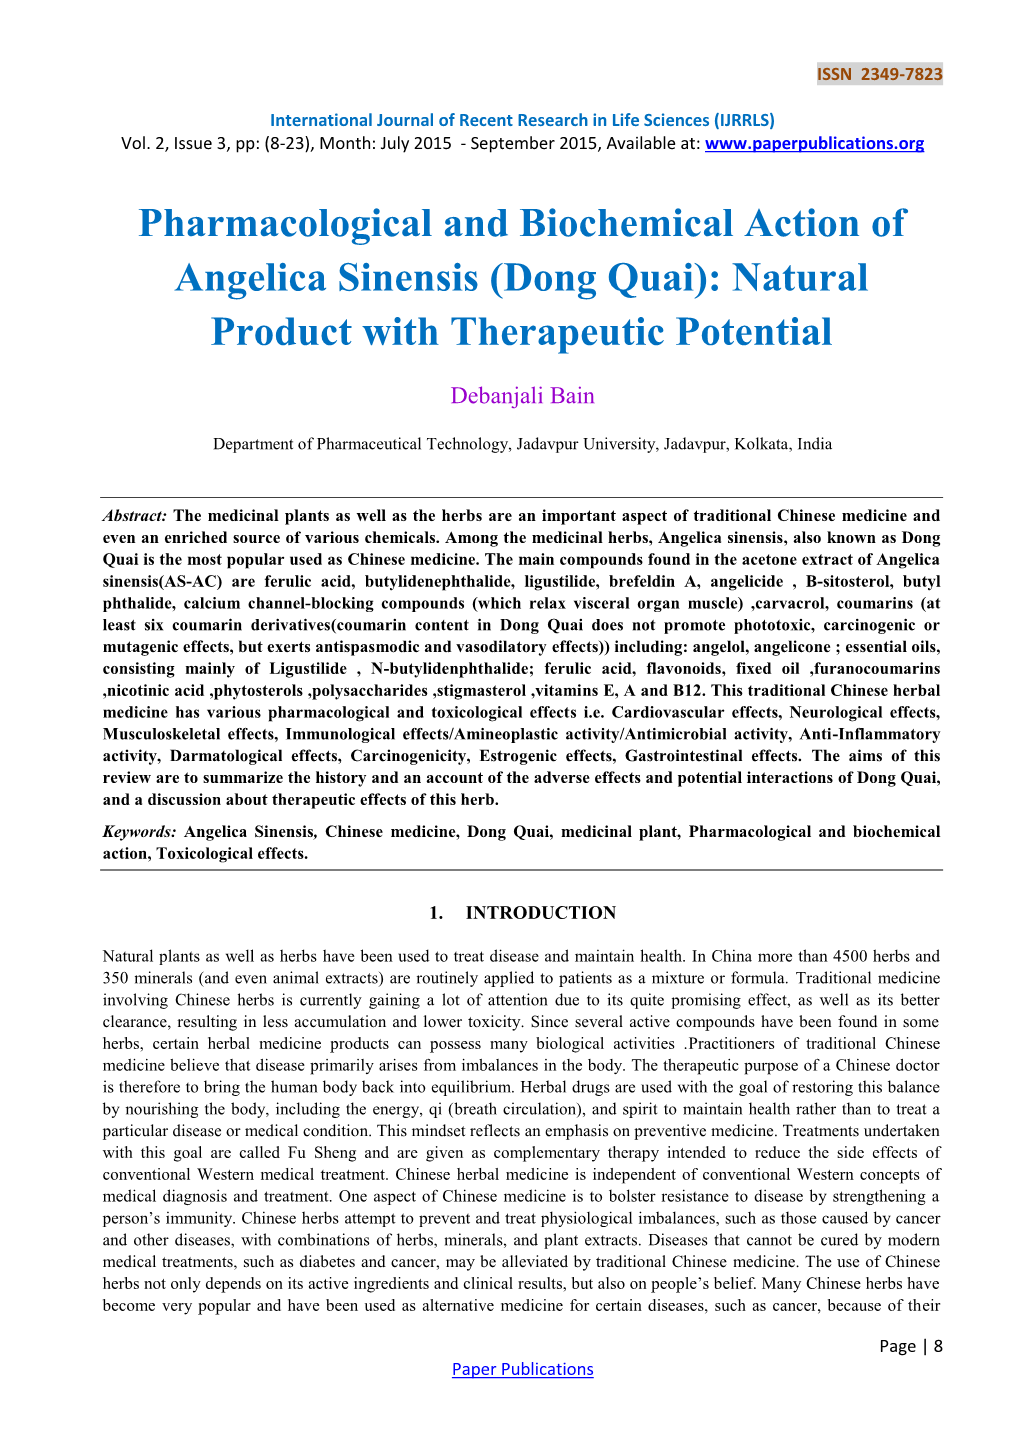 Pharmacological and Biochemical Action of Angelica Sinensis (Dong Quai): Natural Product with Therapeutic Potential